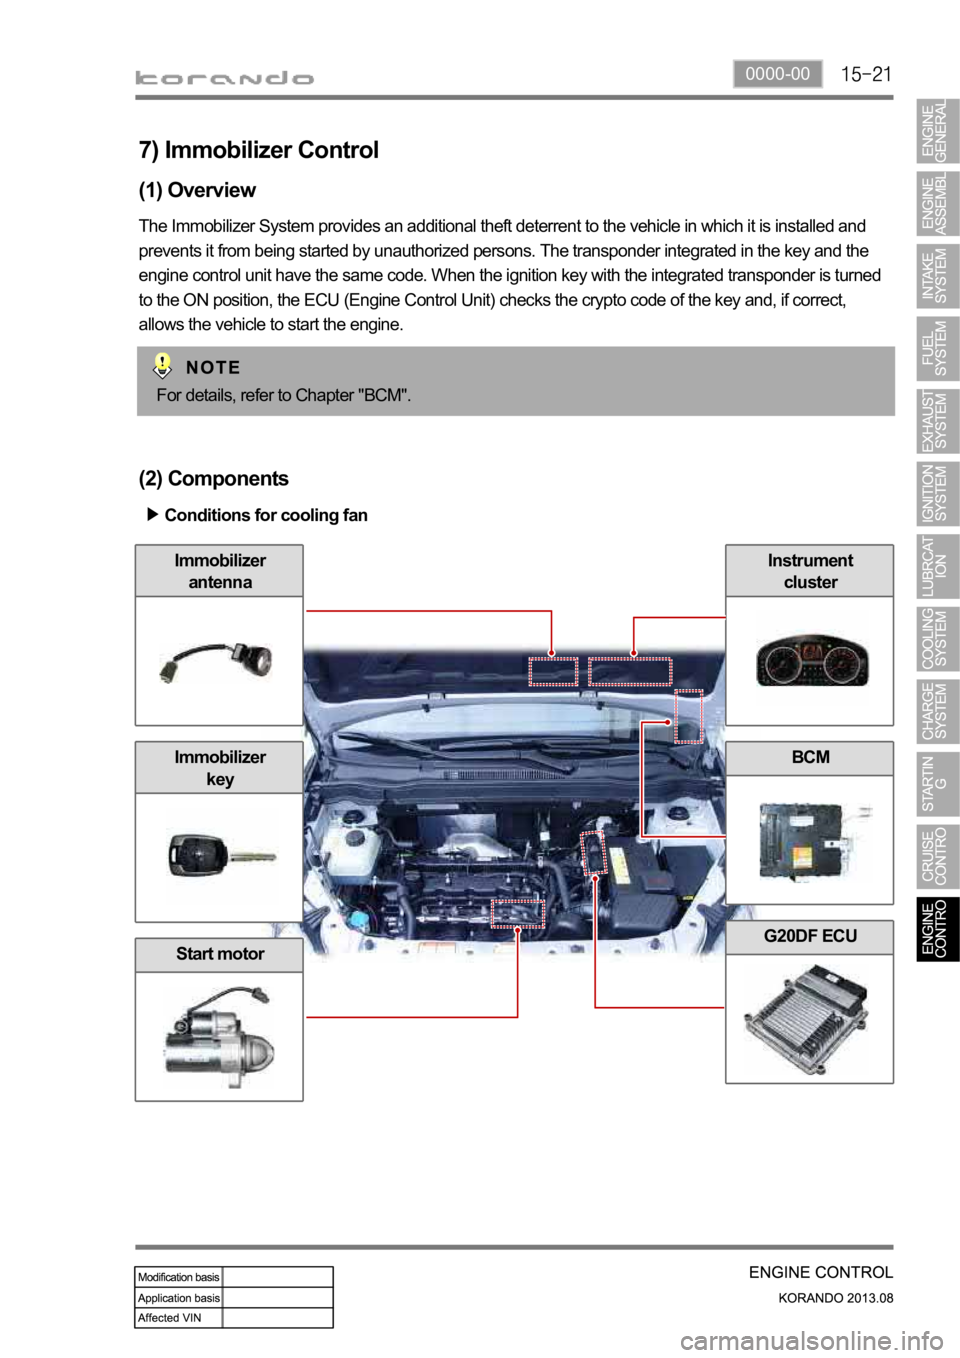 SSANGYONG KORANDO 2013  Service Manual 0000-00
7) Immobilizer Control
(1) Overview
The Immobilizer System provides an additional theft deterrent to the vehicle in which it is installed and 
prevents it from being started by unauthorized pe